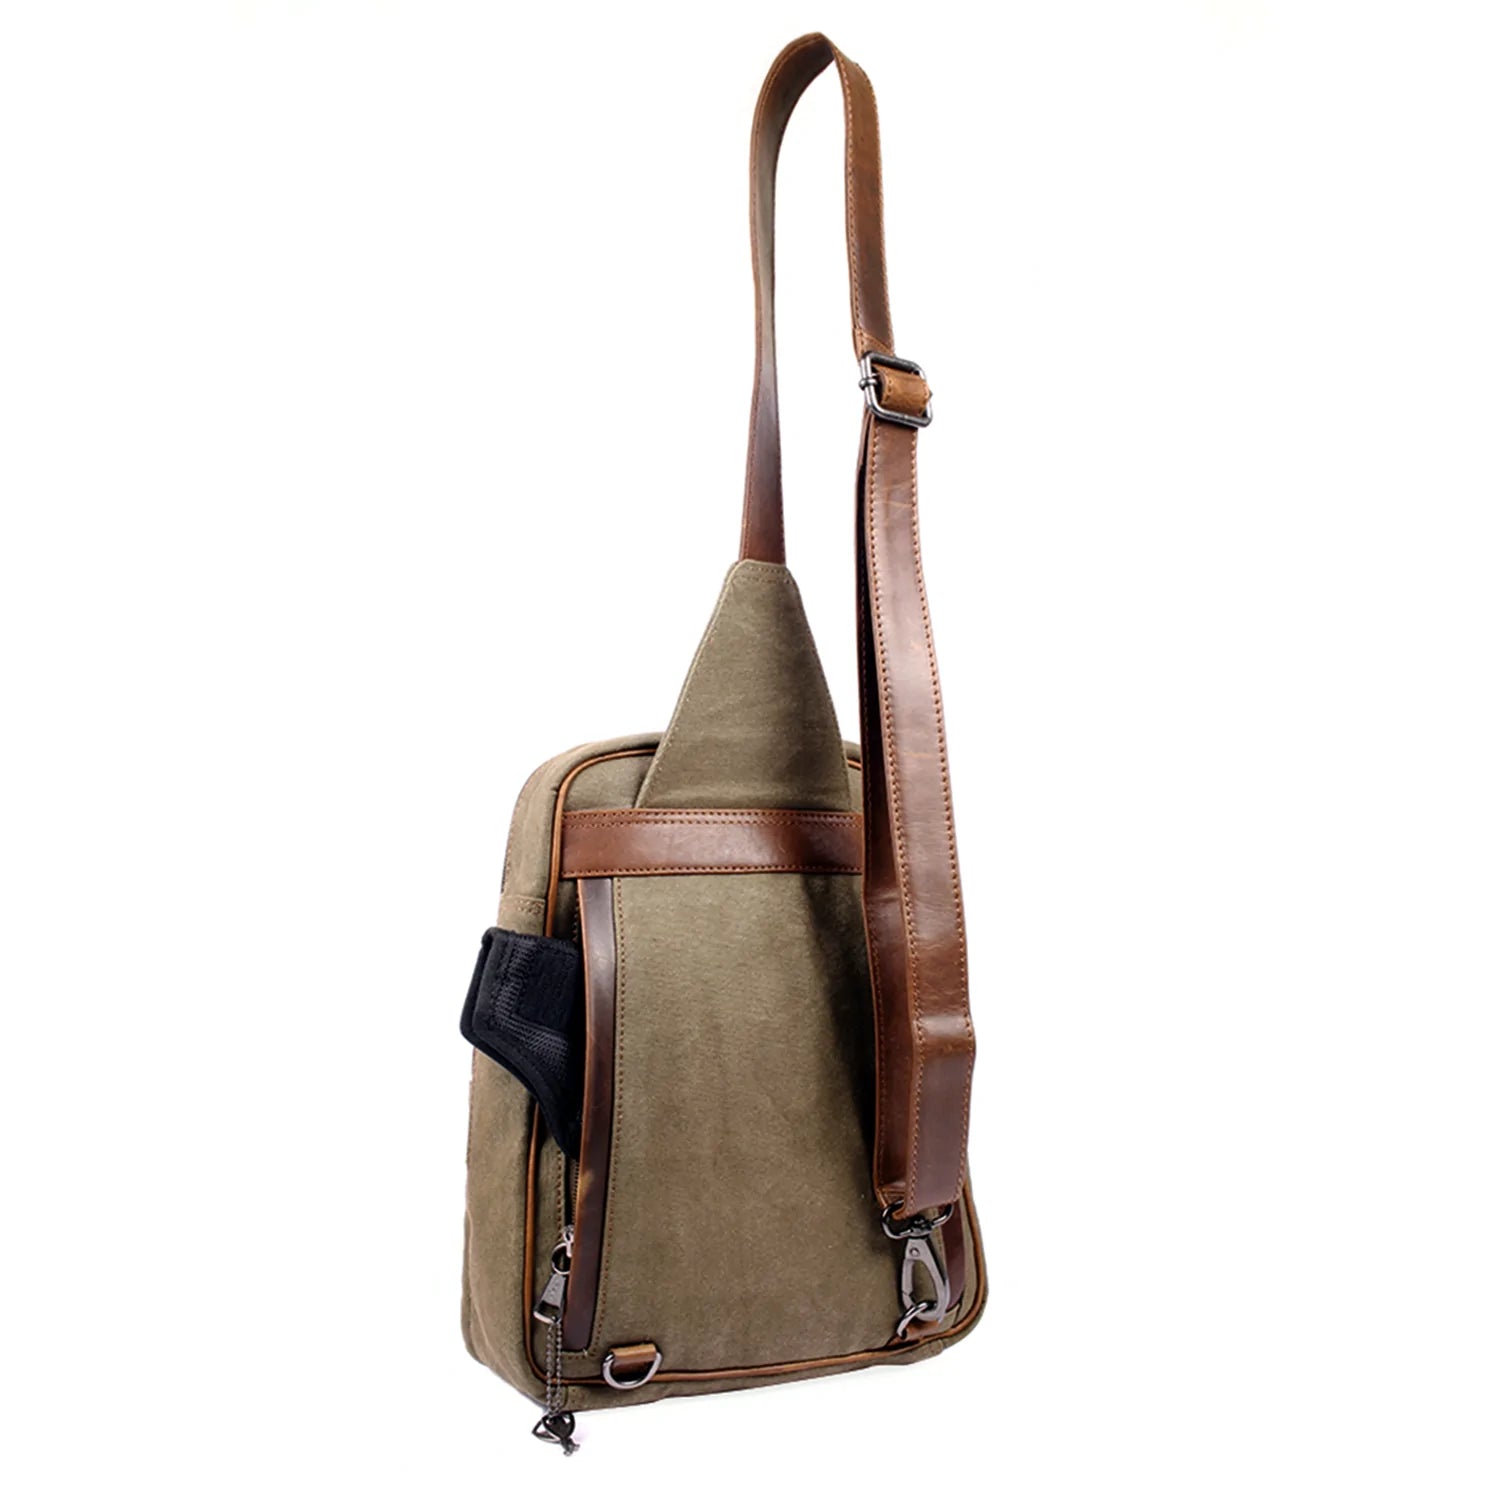 Versatile Canvas Sling Bag Backpack with RFID Security Pocket and